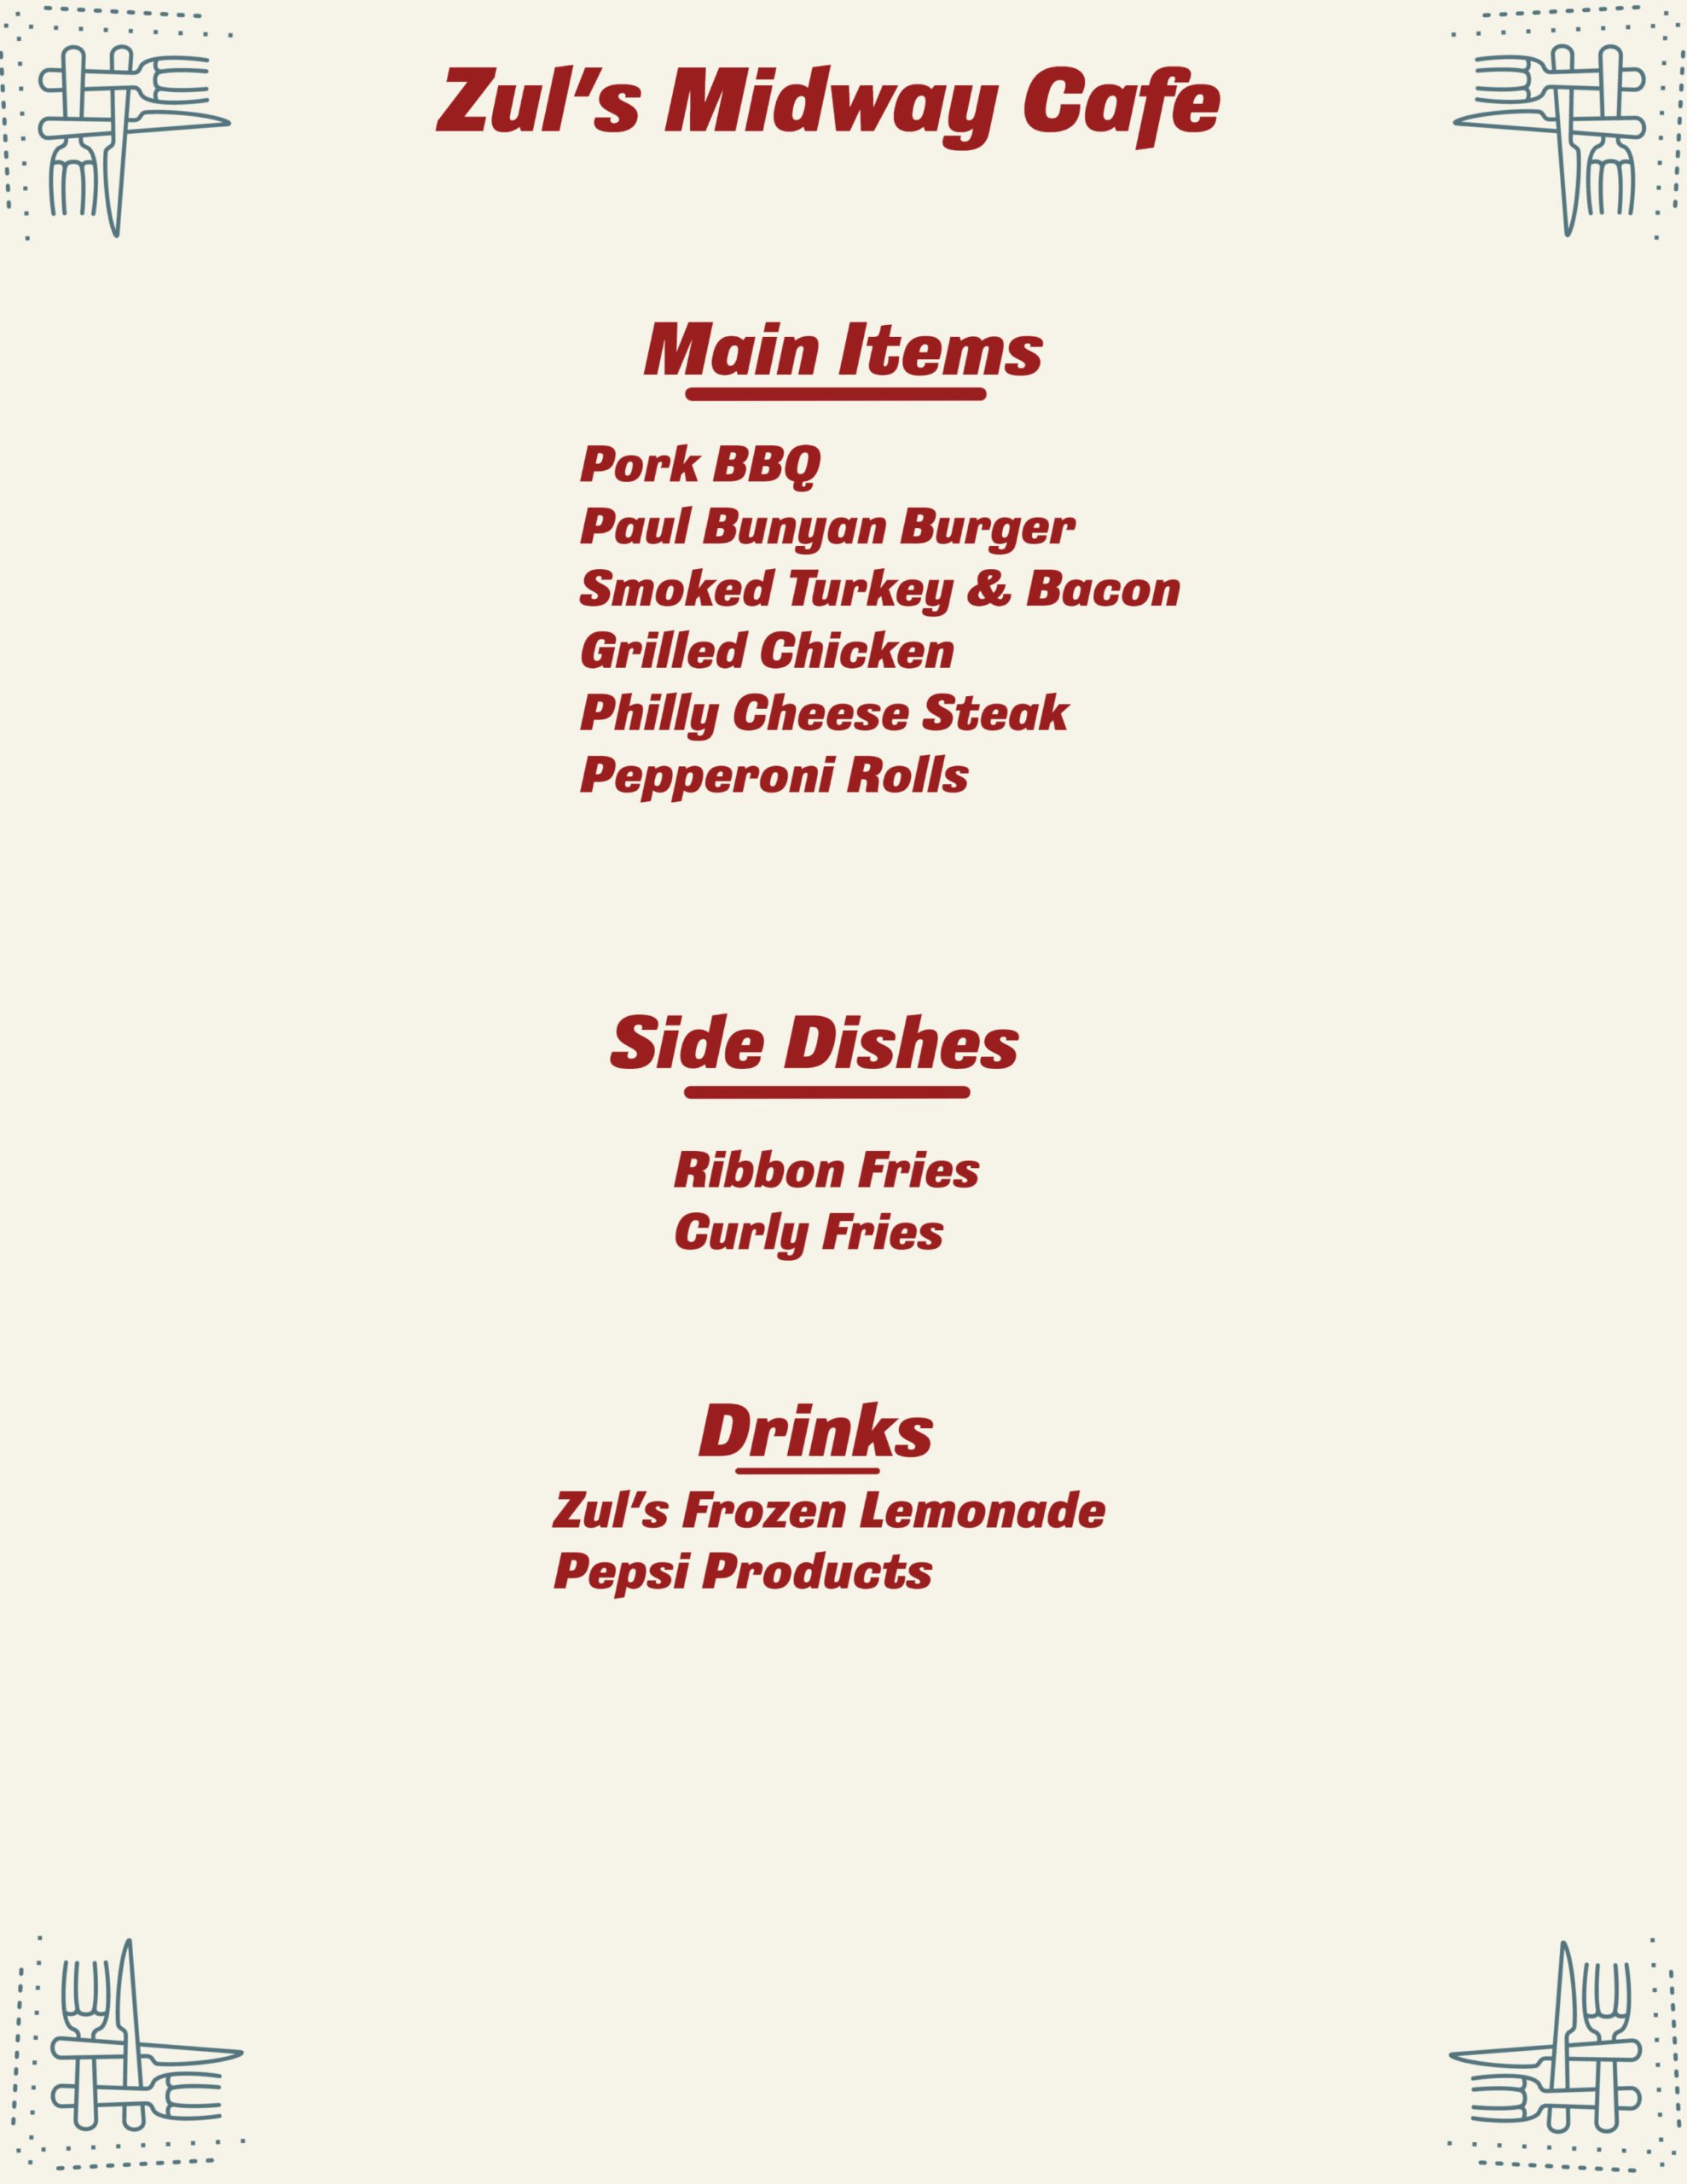 Zuls Midway Cafe Menu scaled 1